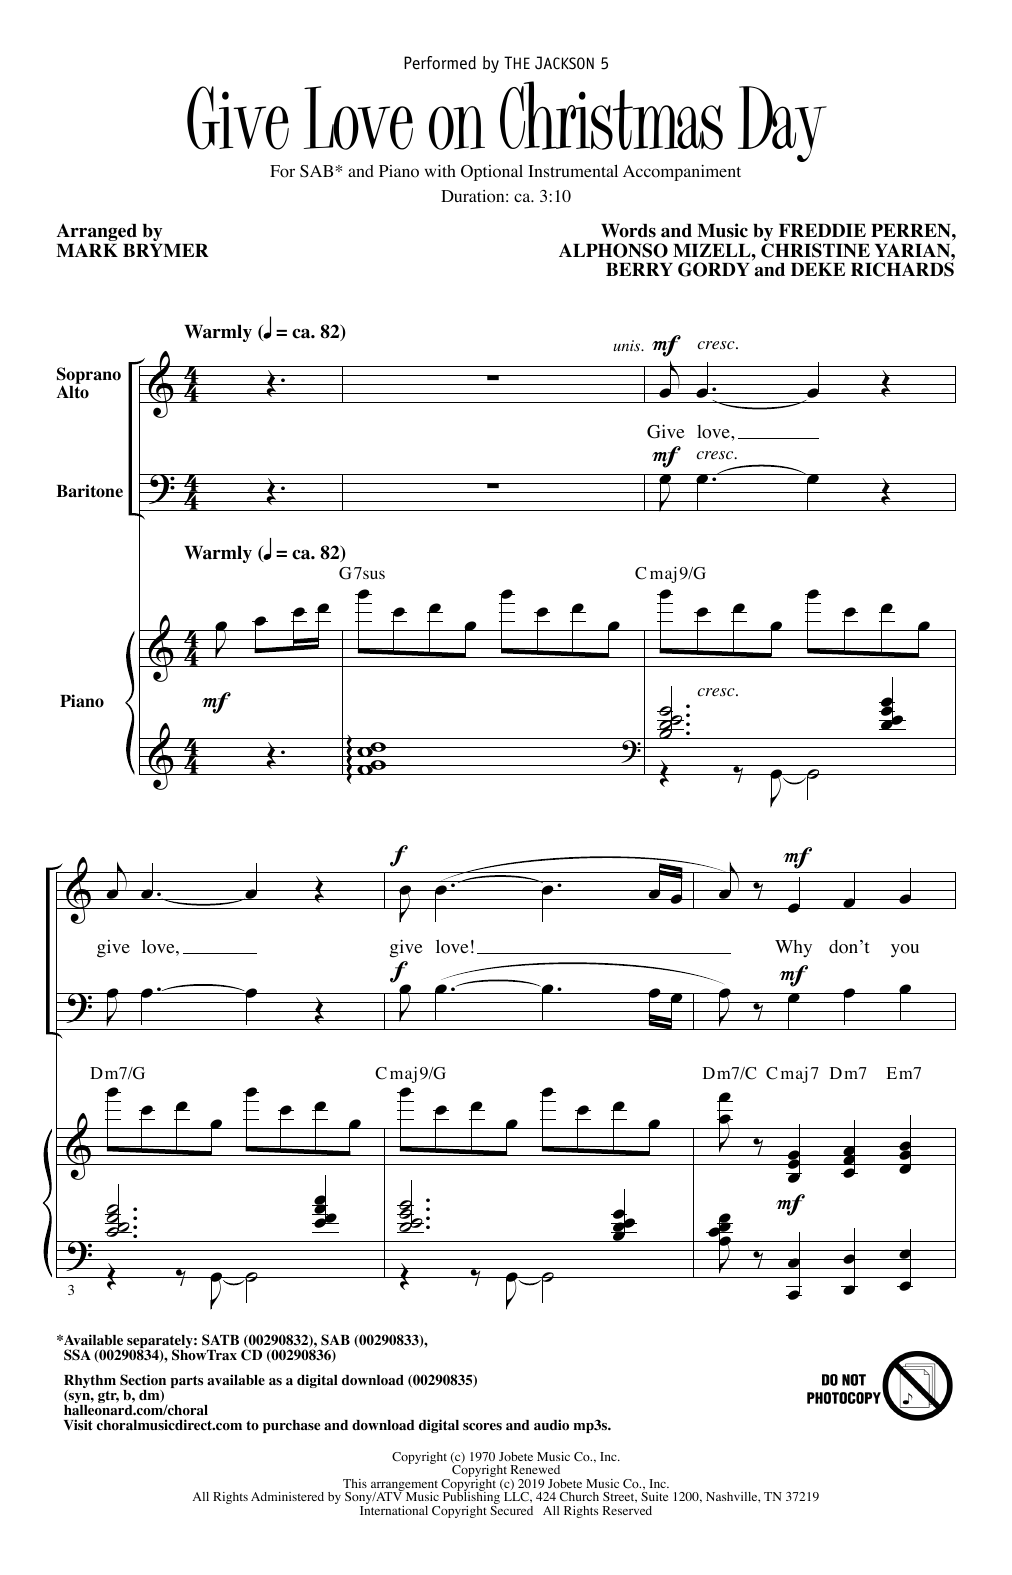 Download The Jackson 5 Give Love On Christmas Day (arr. Mark B Sheet Music